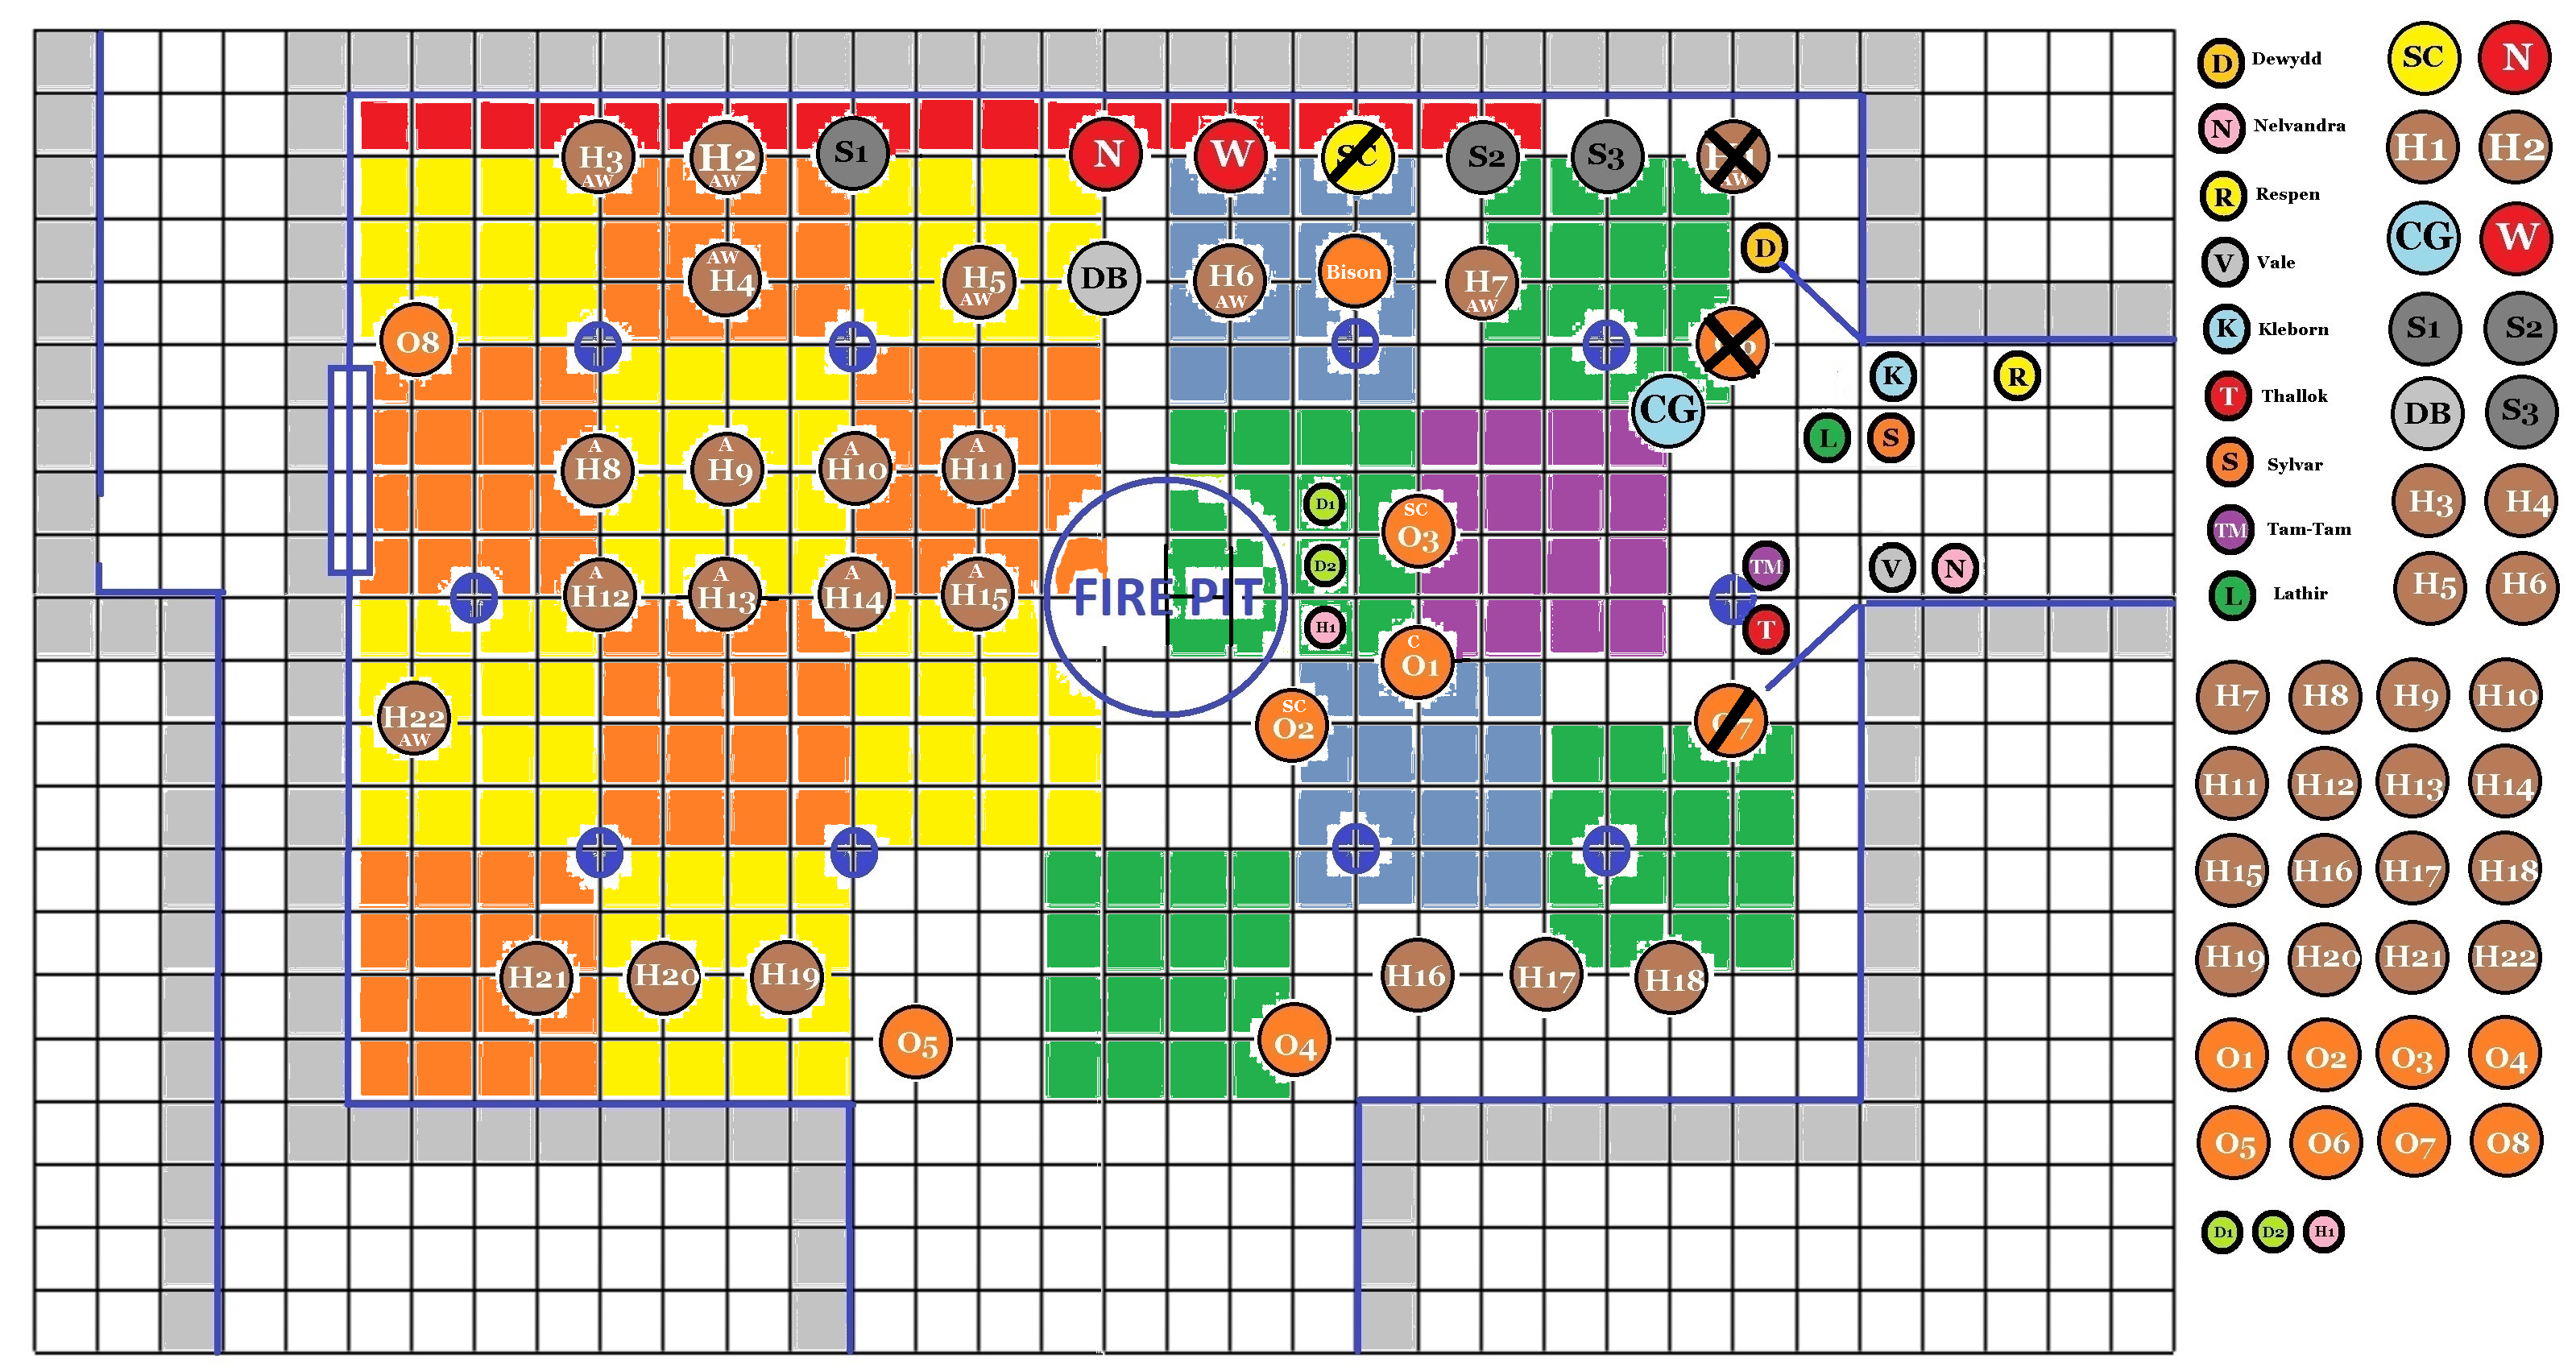 00-Big-Battle-Map-Giant-Great-Hall-001g7.png